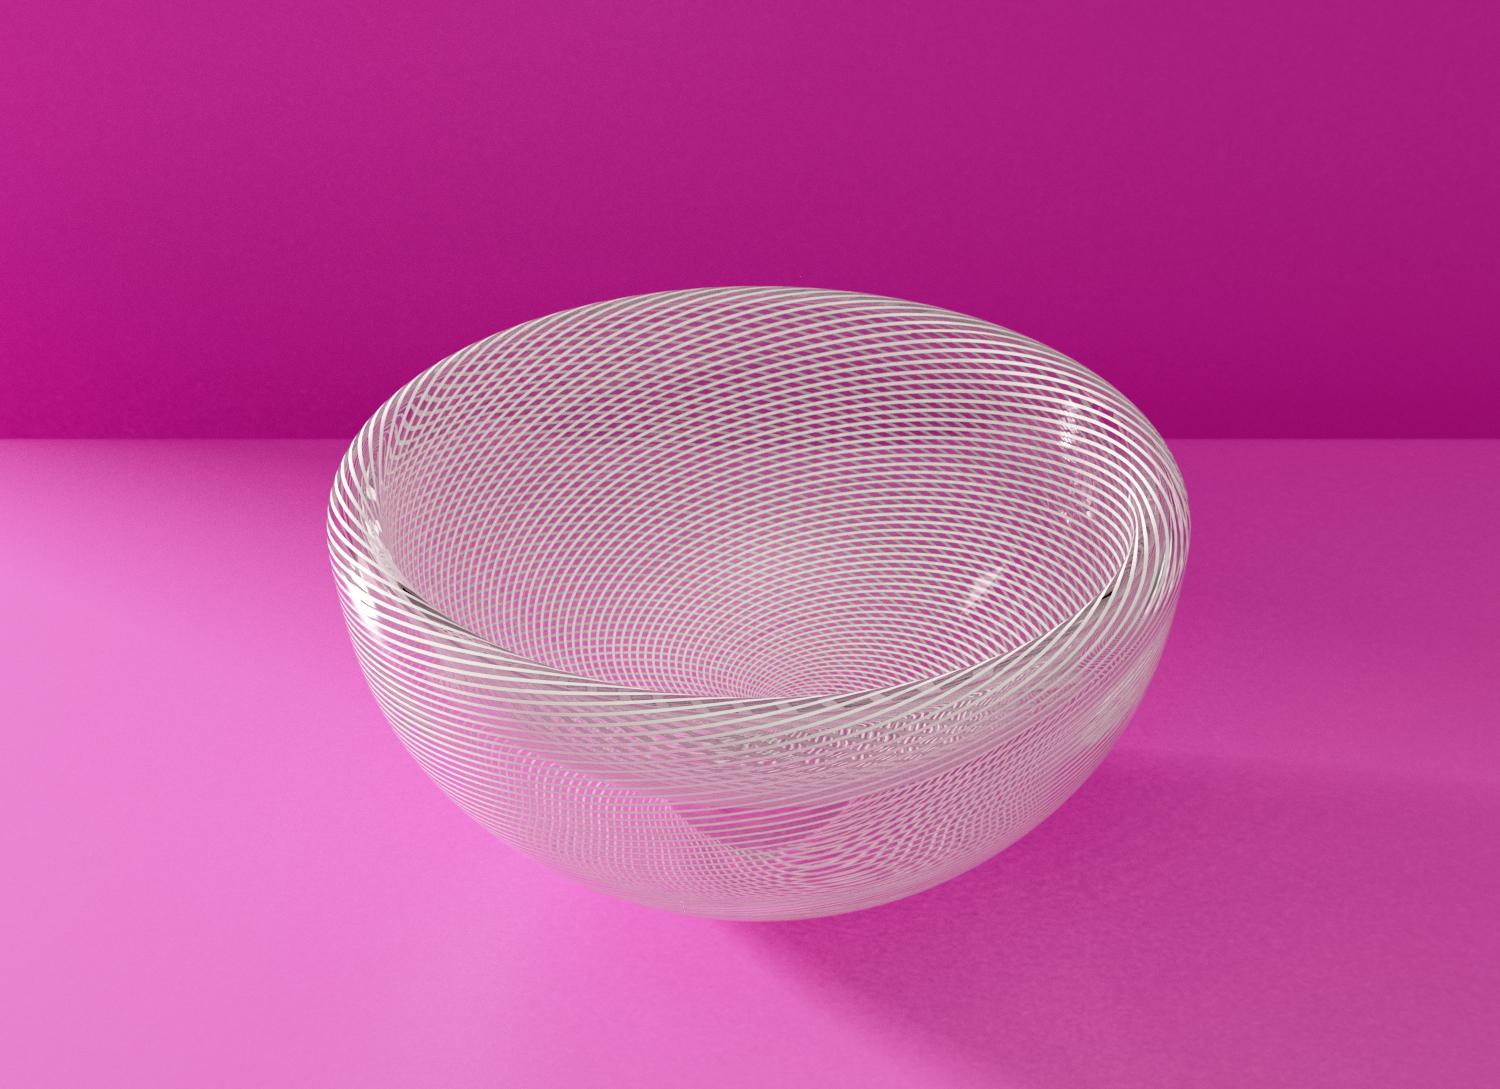 KEEP Zephyr, Handblown Glass Bowl, Mid-Century Inspired Patterned Glass In New Condition For Sale In Brooklyn, NY